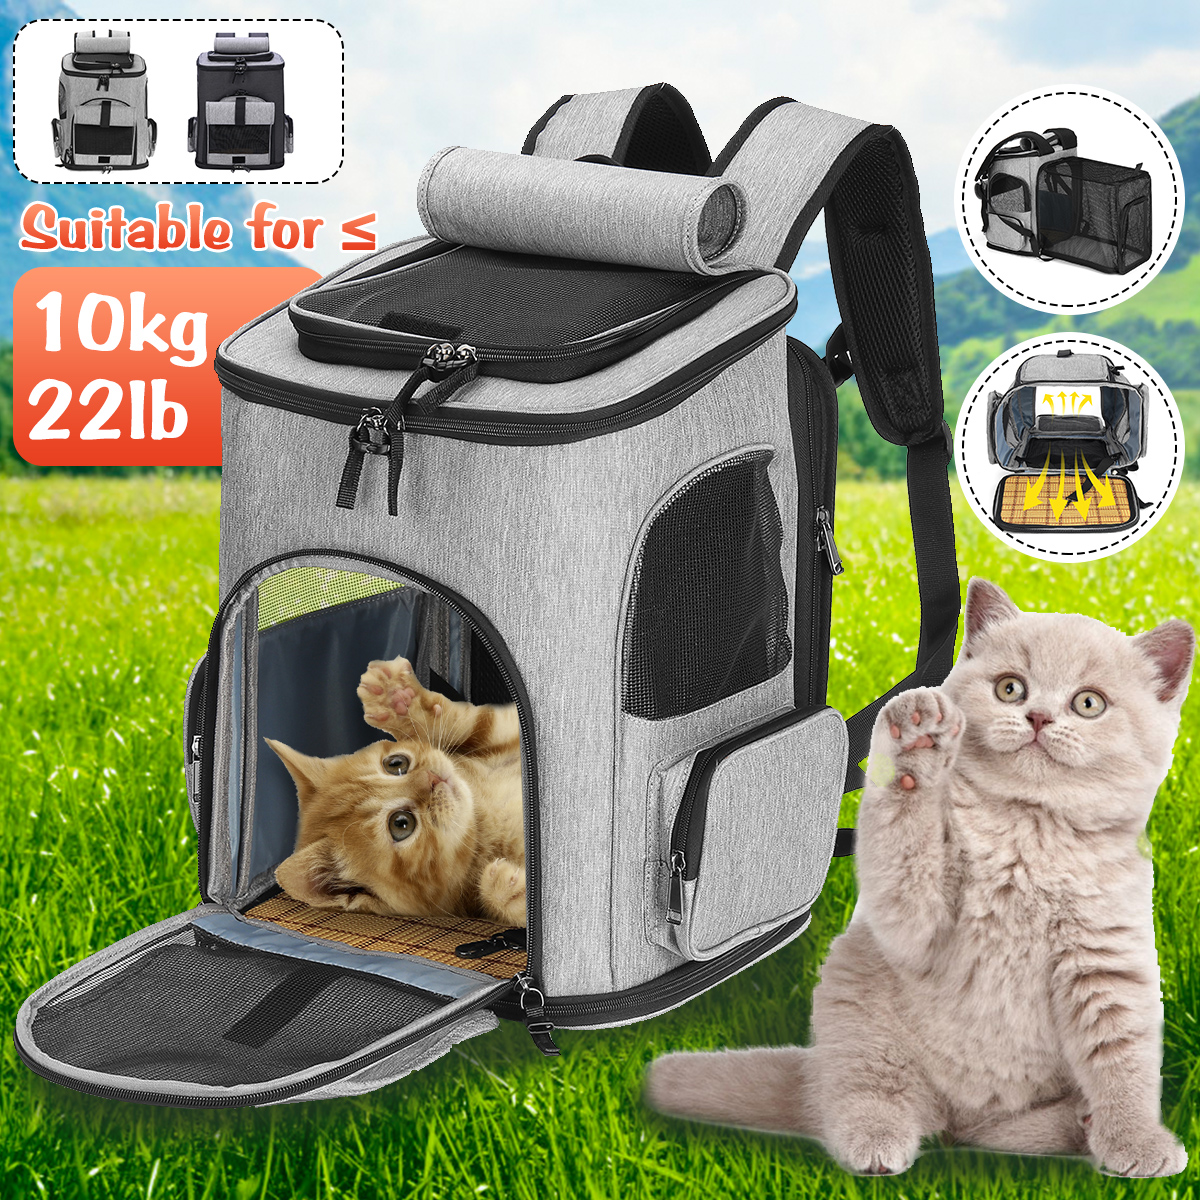 Pet-Carrier-Backpack-Breathable-Puppy-Travel-Space-Shoulder-Bag-Dog-Cat-Outdoor-Double-sided-cushion-1925739-1